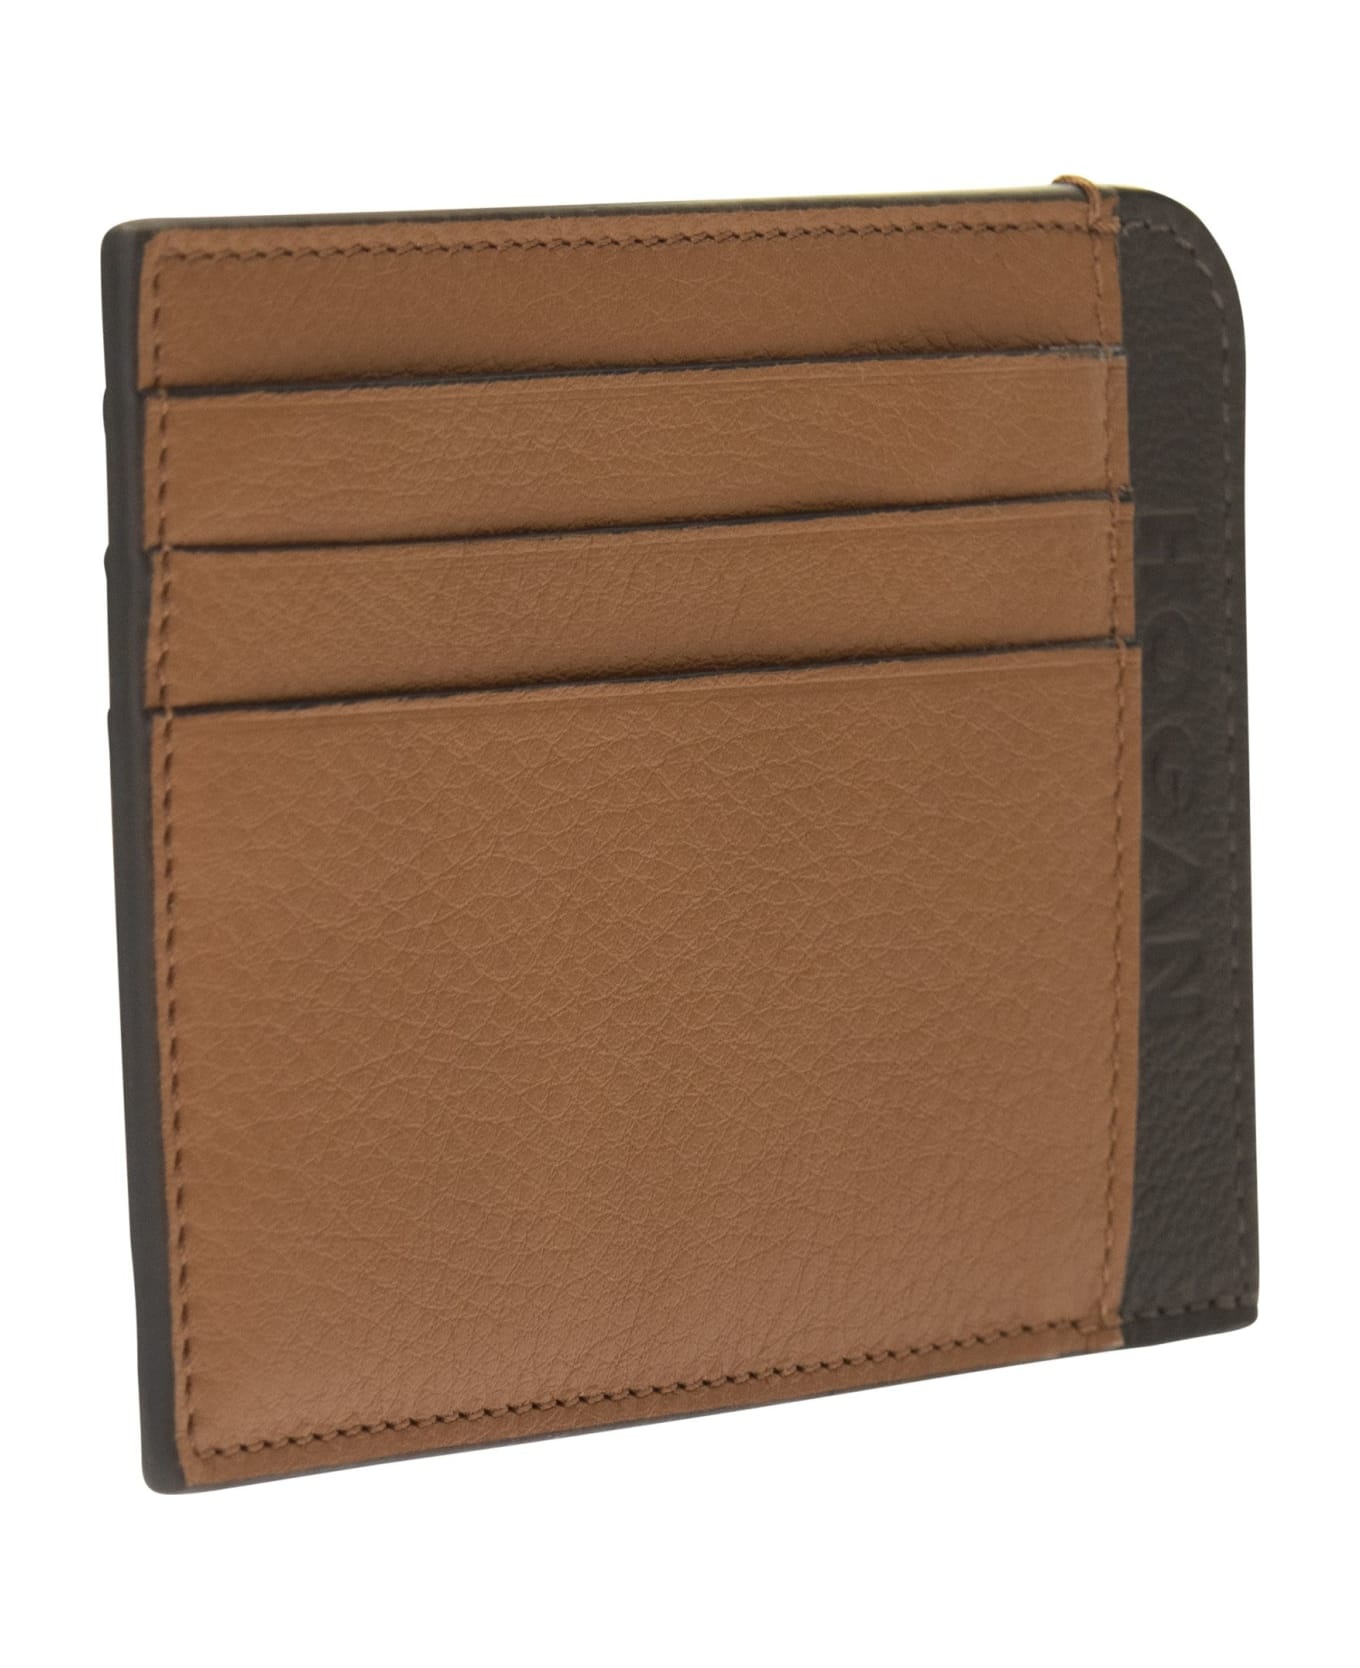 Leather Credit Card Case - 4